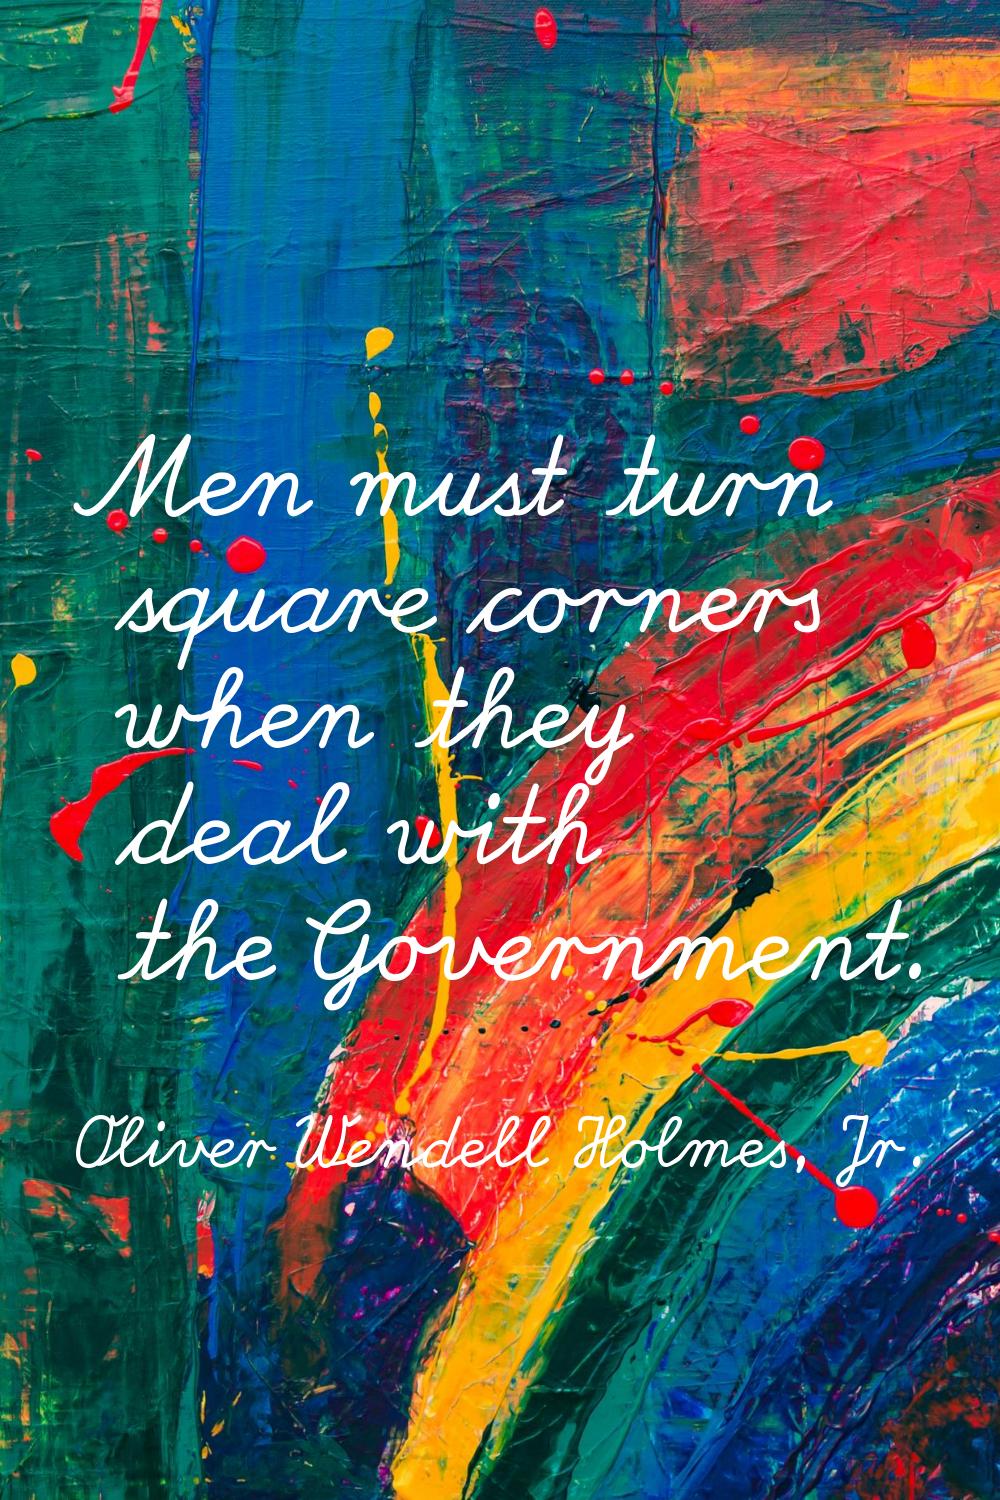 Men must turn square corners when they deal with the Government.